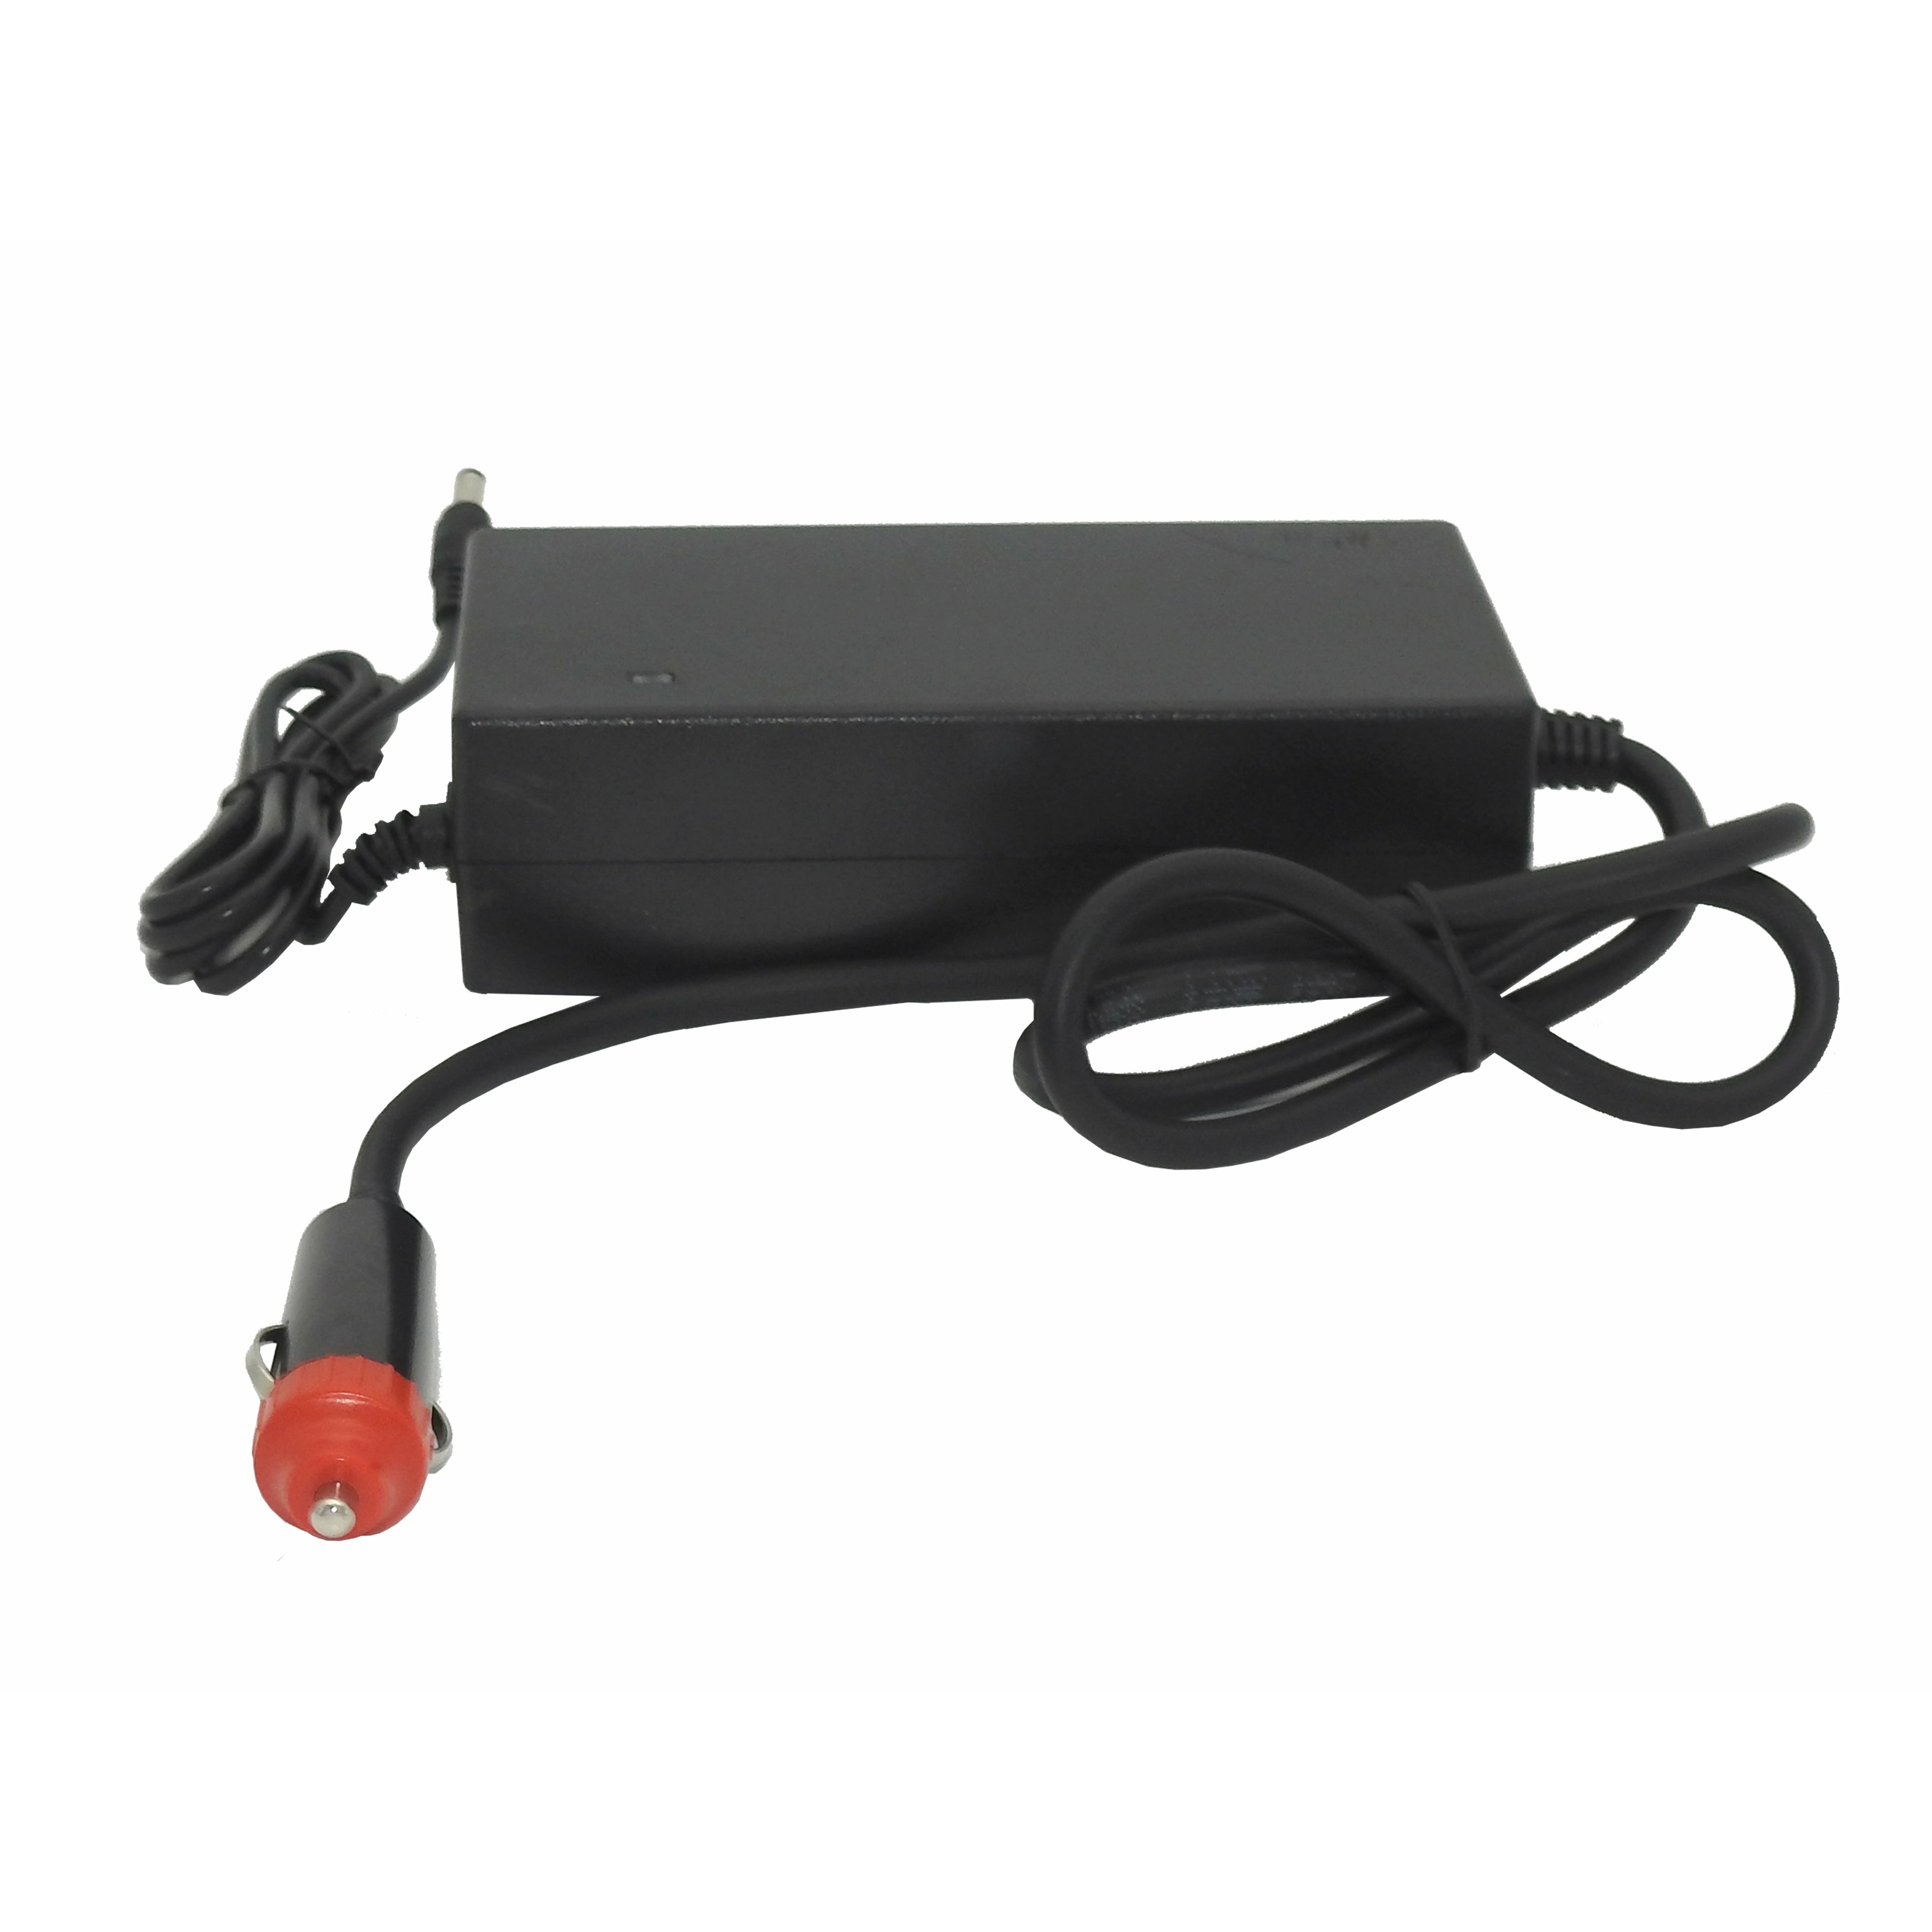 Thumper LiFePO4 DC to DC (In vehicle) Battery Charger 10 Amp